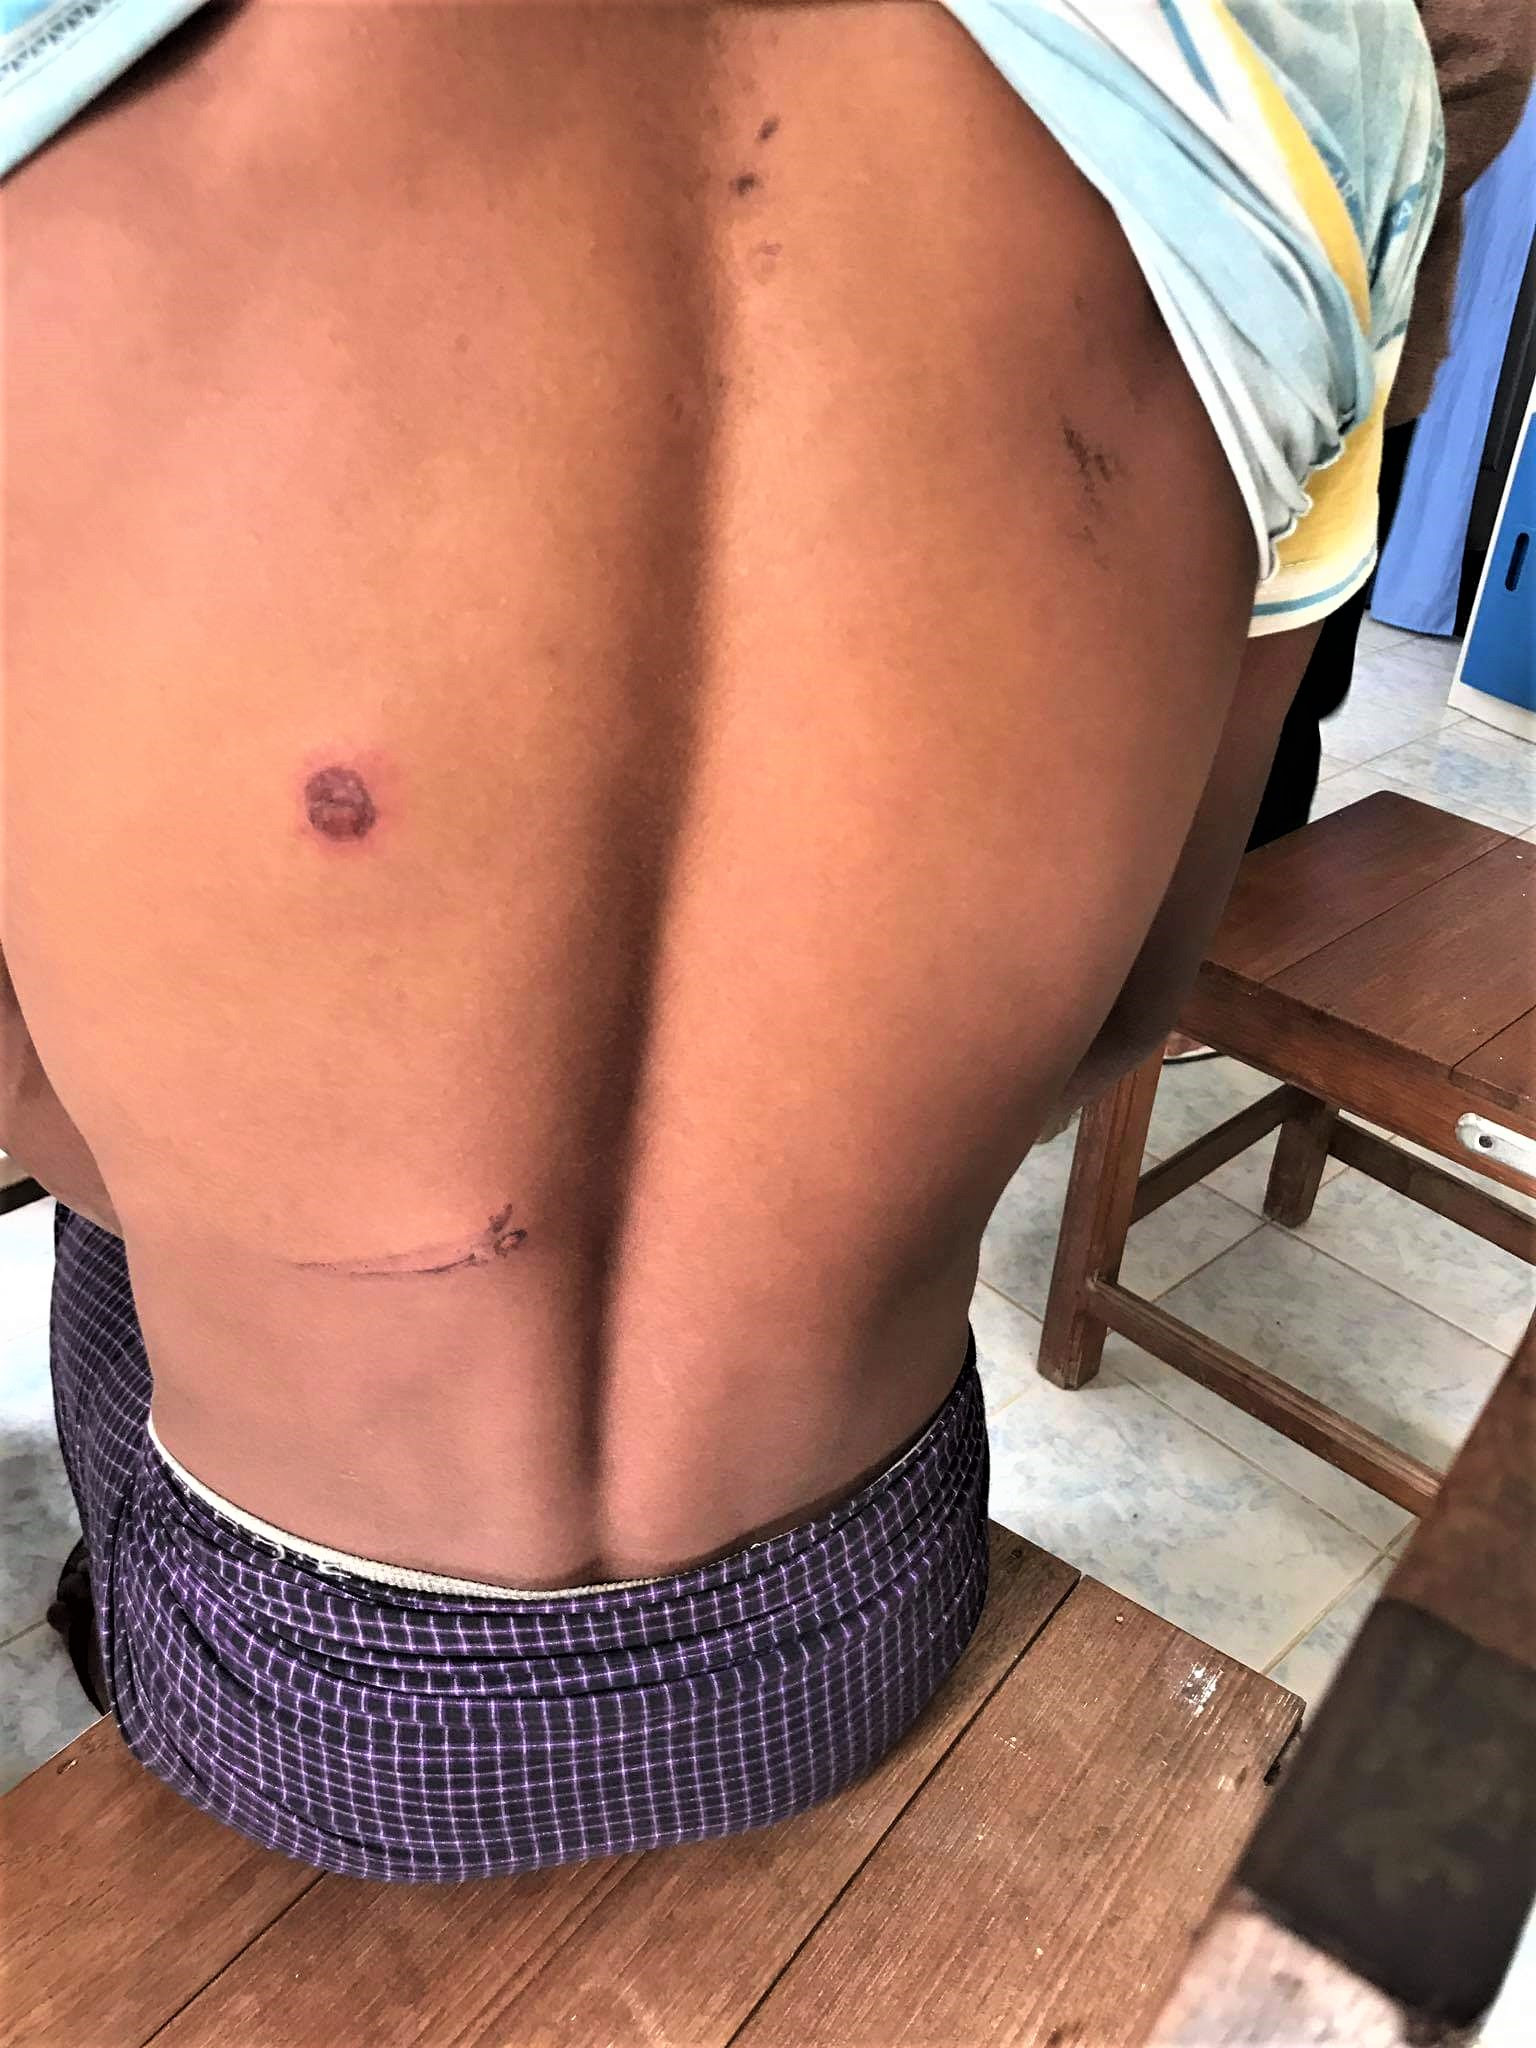  Injured back of Christian in Paw Lwe village, central Burma on Dec. 17, 2018. (Morning Star News)